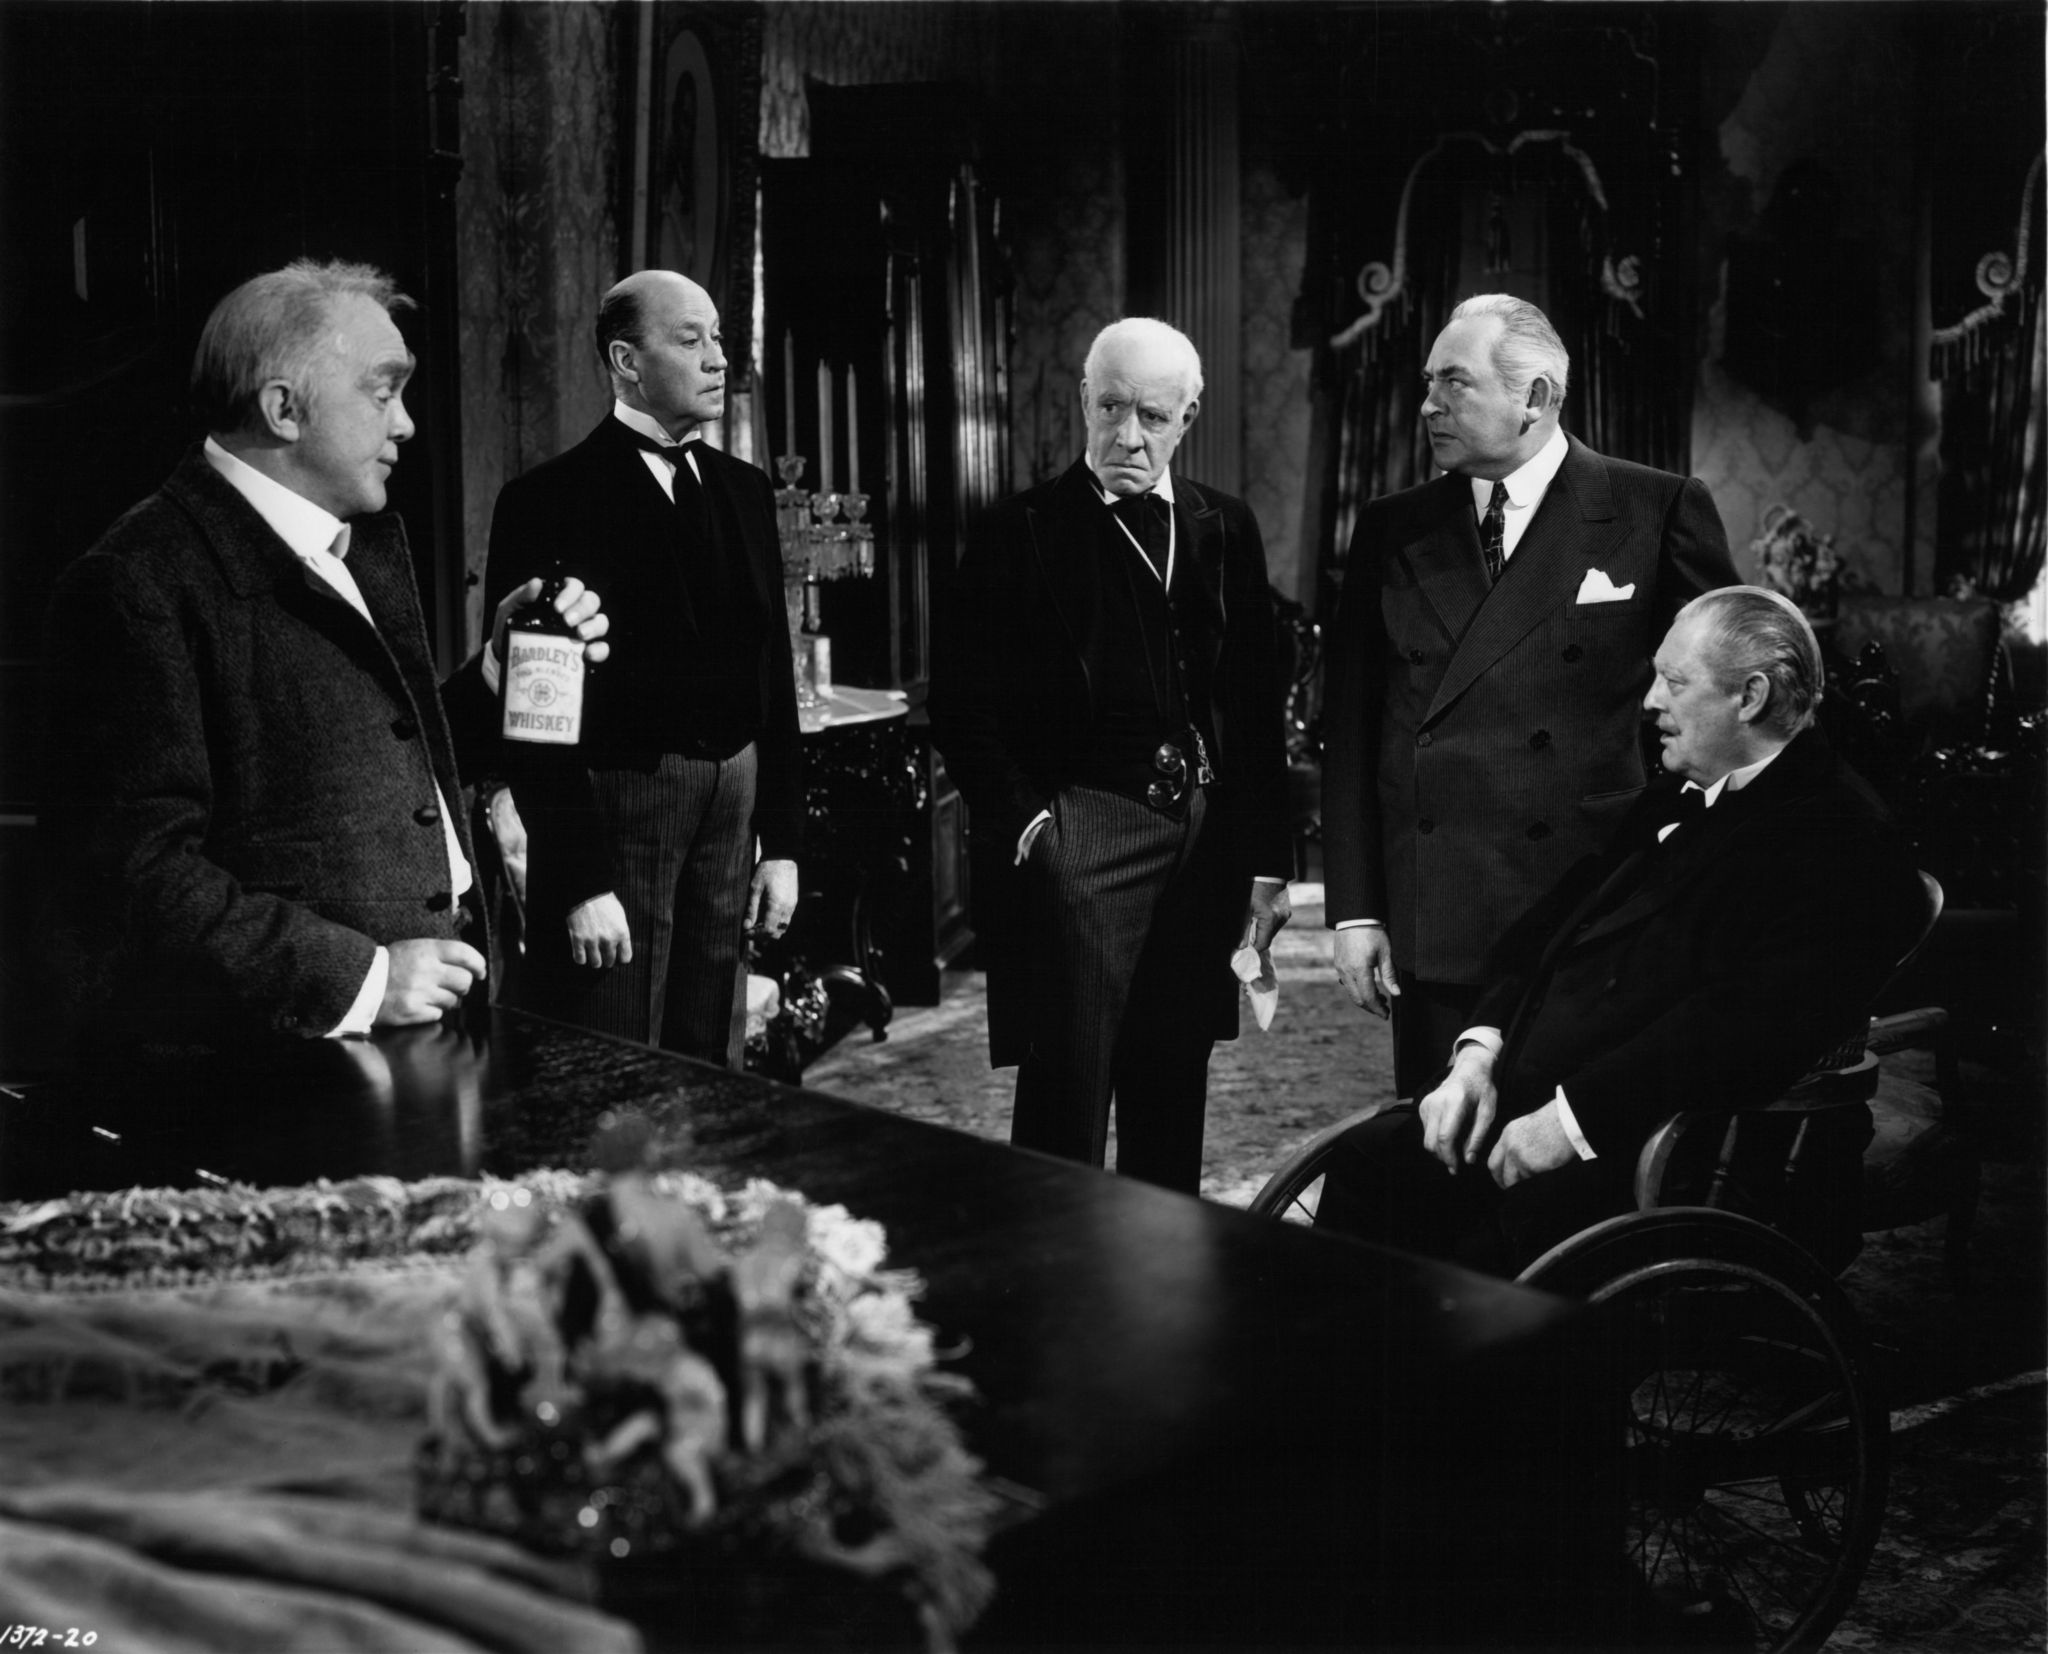 Lionel Barrymore, Edward Arnold, Thomas Mitchell and Lewis Stone in Three Wise Fools (1946)